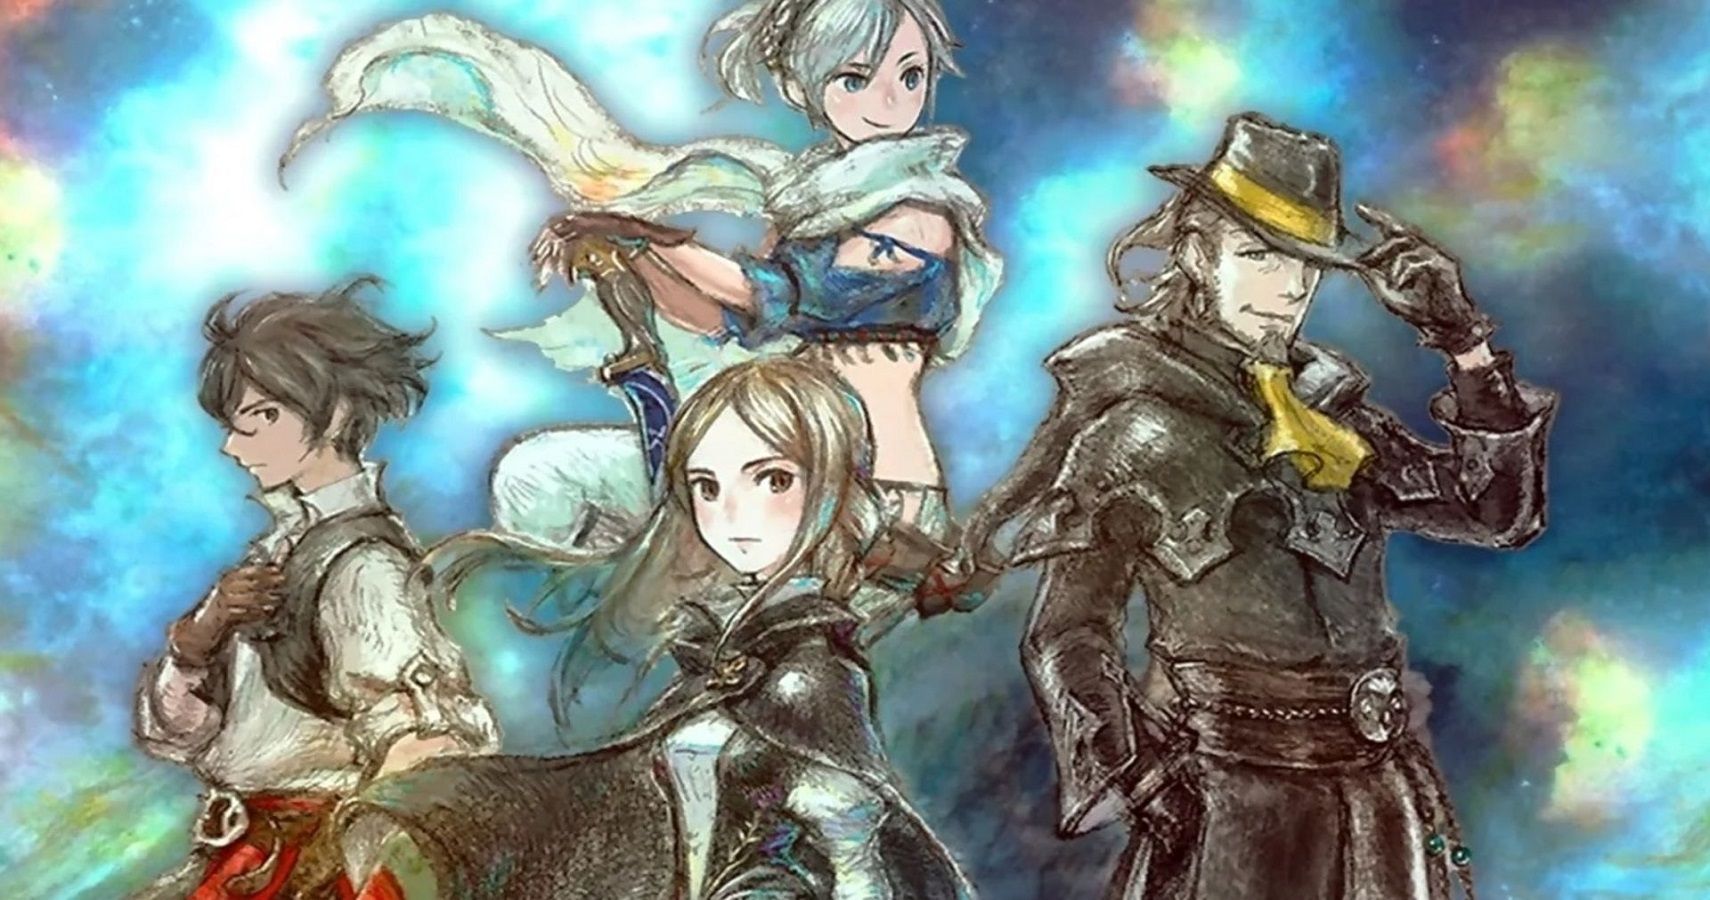 Octopath Traveler 2 and Bravely Default 2 are Good Omens for